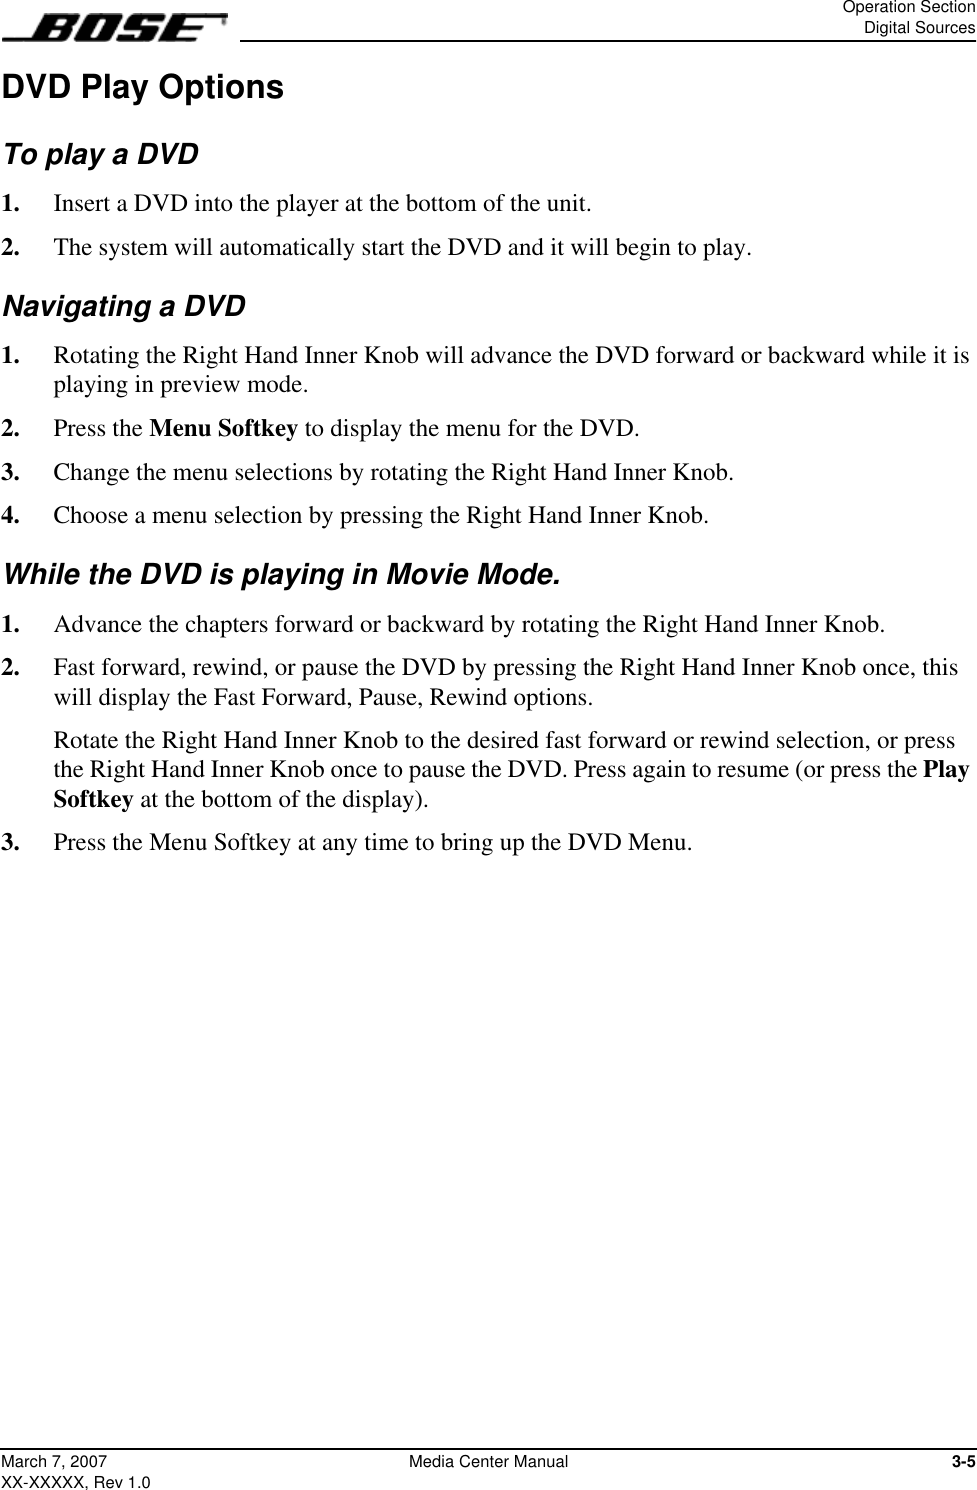 Operation SectionDigital Sources3-5March 7, 2007XX-XXXXX, Rev 1.0Media Center ManualDVD Play OptionsTo play a DVD1.  Insert a DVD into the player at the bottom of the unit.2.  The system will automatically start the DVD and it will begin to play.Navigating a DVD1.  Rotating the Right Hand Inner Knob will advance the DVD forward or backward while it is playing in preview mode.2.  Press the Menu Softkey to display the menu for the DVD.3.  Change the menu selections by rotating the Right Hand Inner Knob.4.  Choose a menu selection by pressing the Right Hand Inner Knob. While the DVD is playing in Movie Mode.1.  Advance the chapters forward or backward by rotating the Right Hand Inner Knob.2.  Fast forward, rewind, or pause the DVD by pressing the Right Hand Inner Knob once, this will display the Fast Forward, Pause, Rewind options.  Rotate the Right Hand Inner Knob to the desired fast forward or rewind selection, or press the Right Hand Inner Knob once to pause the DVD. Press again to resume (or press the Play Softkey at the bottom of the display).3.  Press the Menu Softkey at any time to bring up the DVD Menu. 